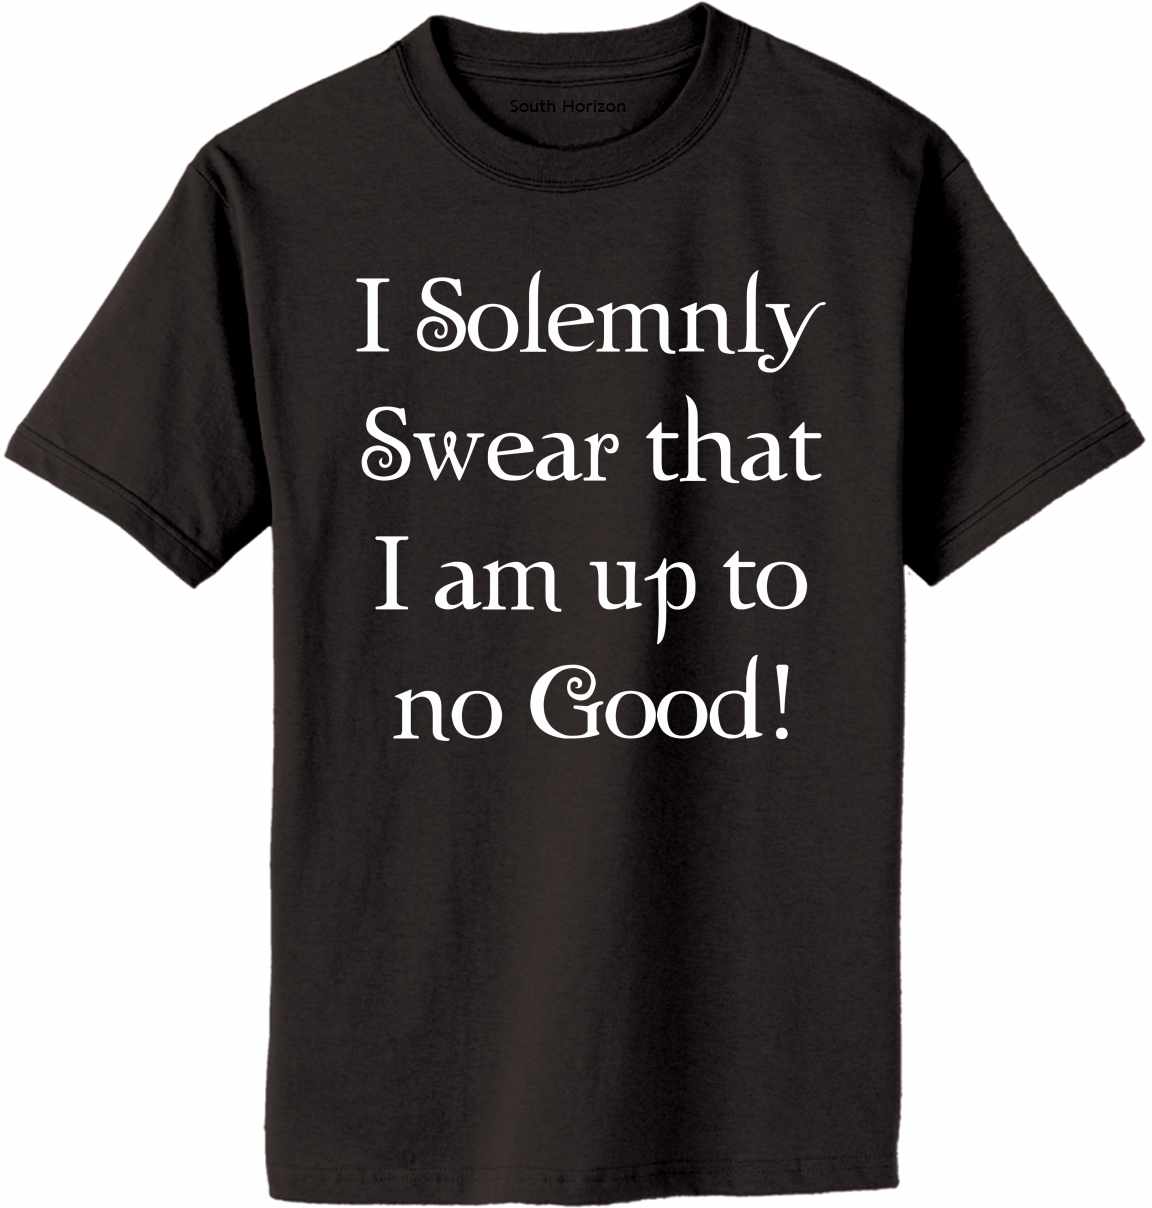 I Solemnly Swear that I am up to No Good! Adult T-Shirt